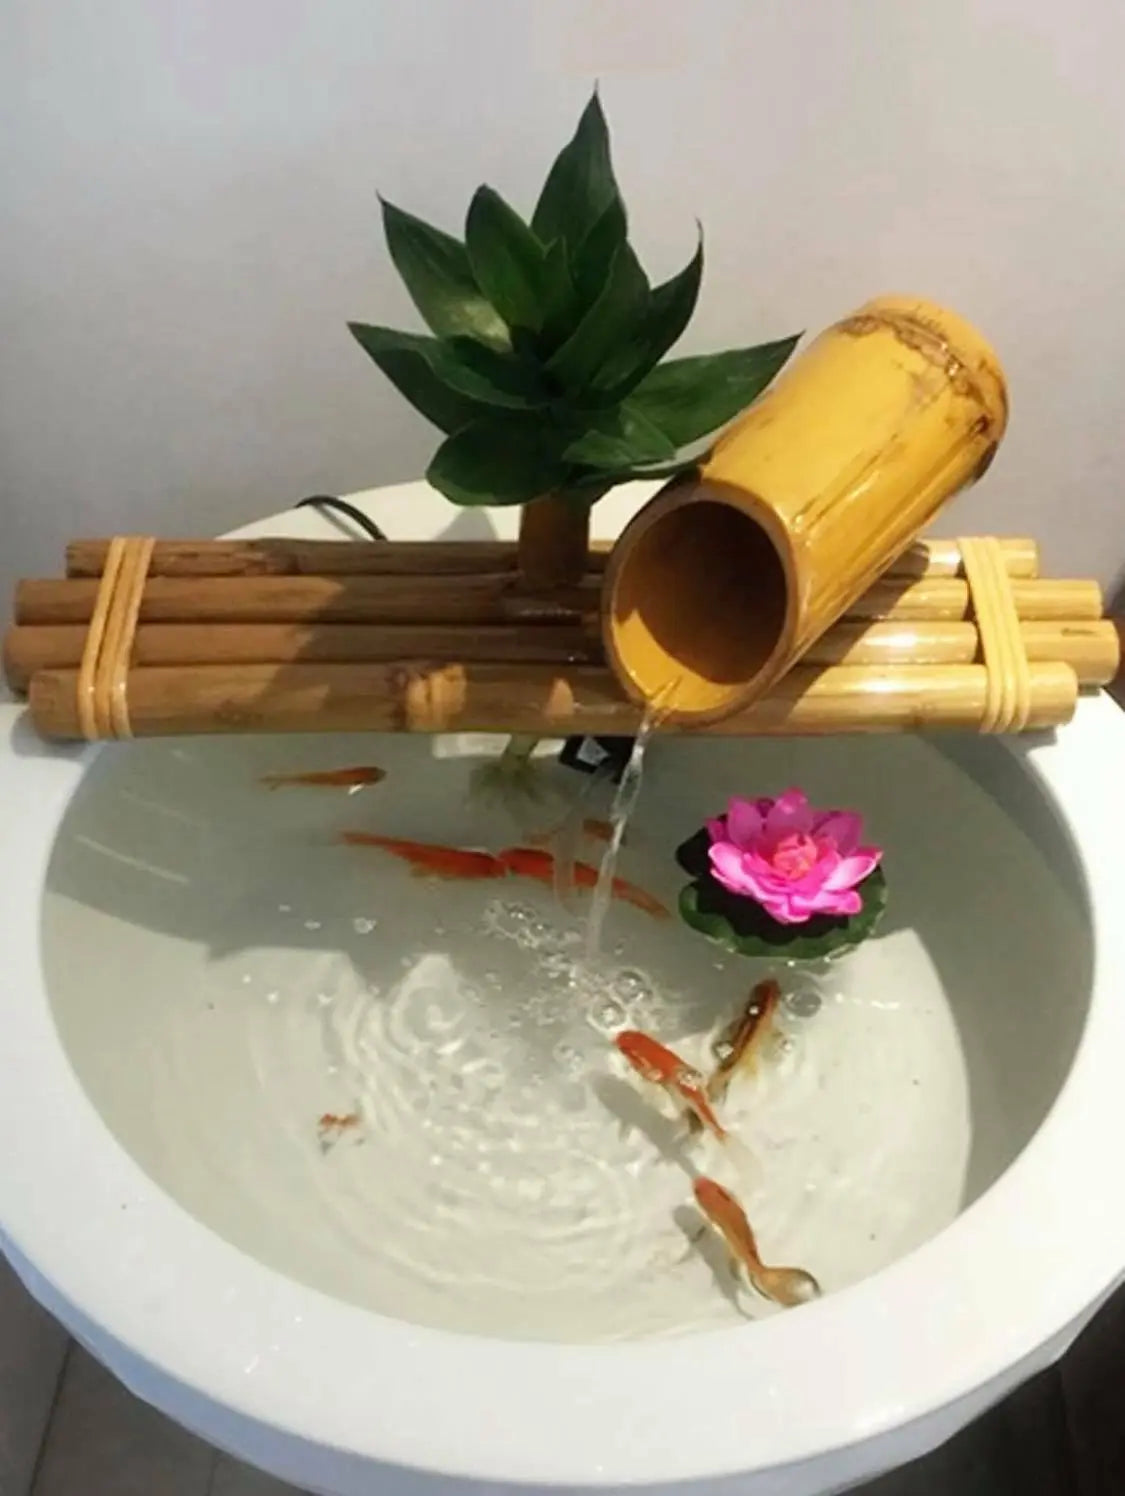 Bamboo Water Fountain Water Feature Flowing Indoor Outdoor Garden Decoration everythingbamboo